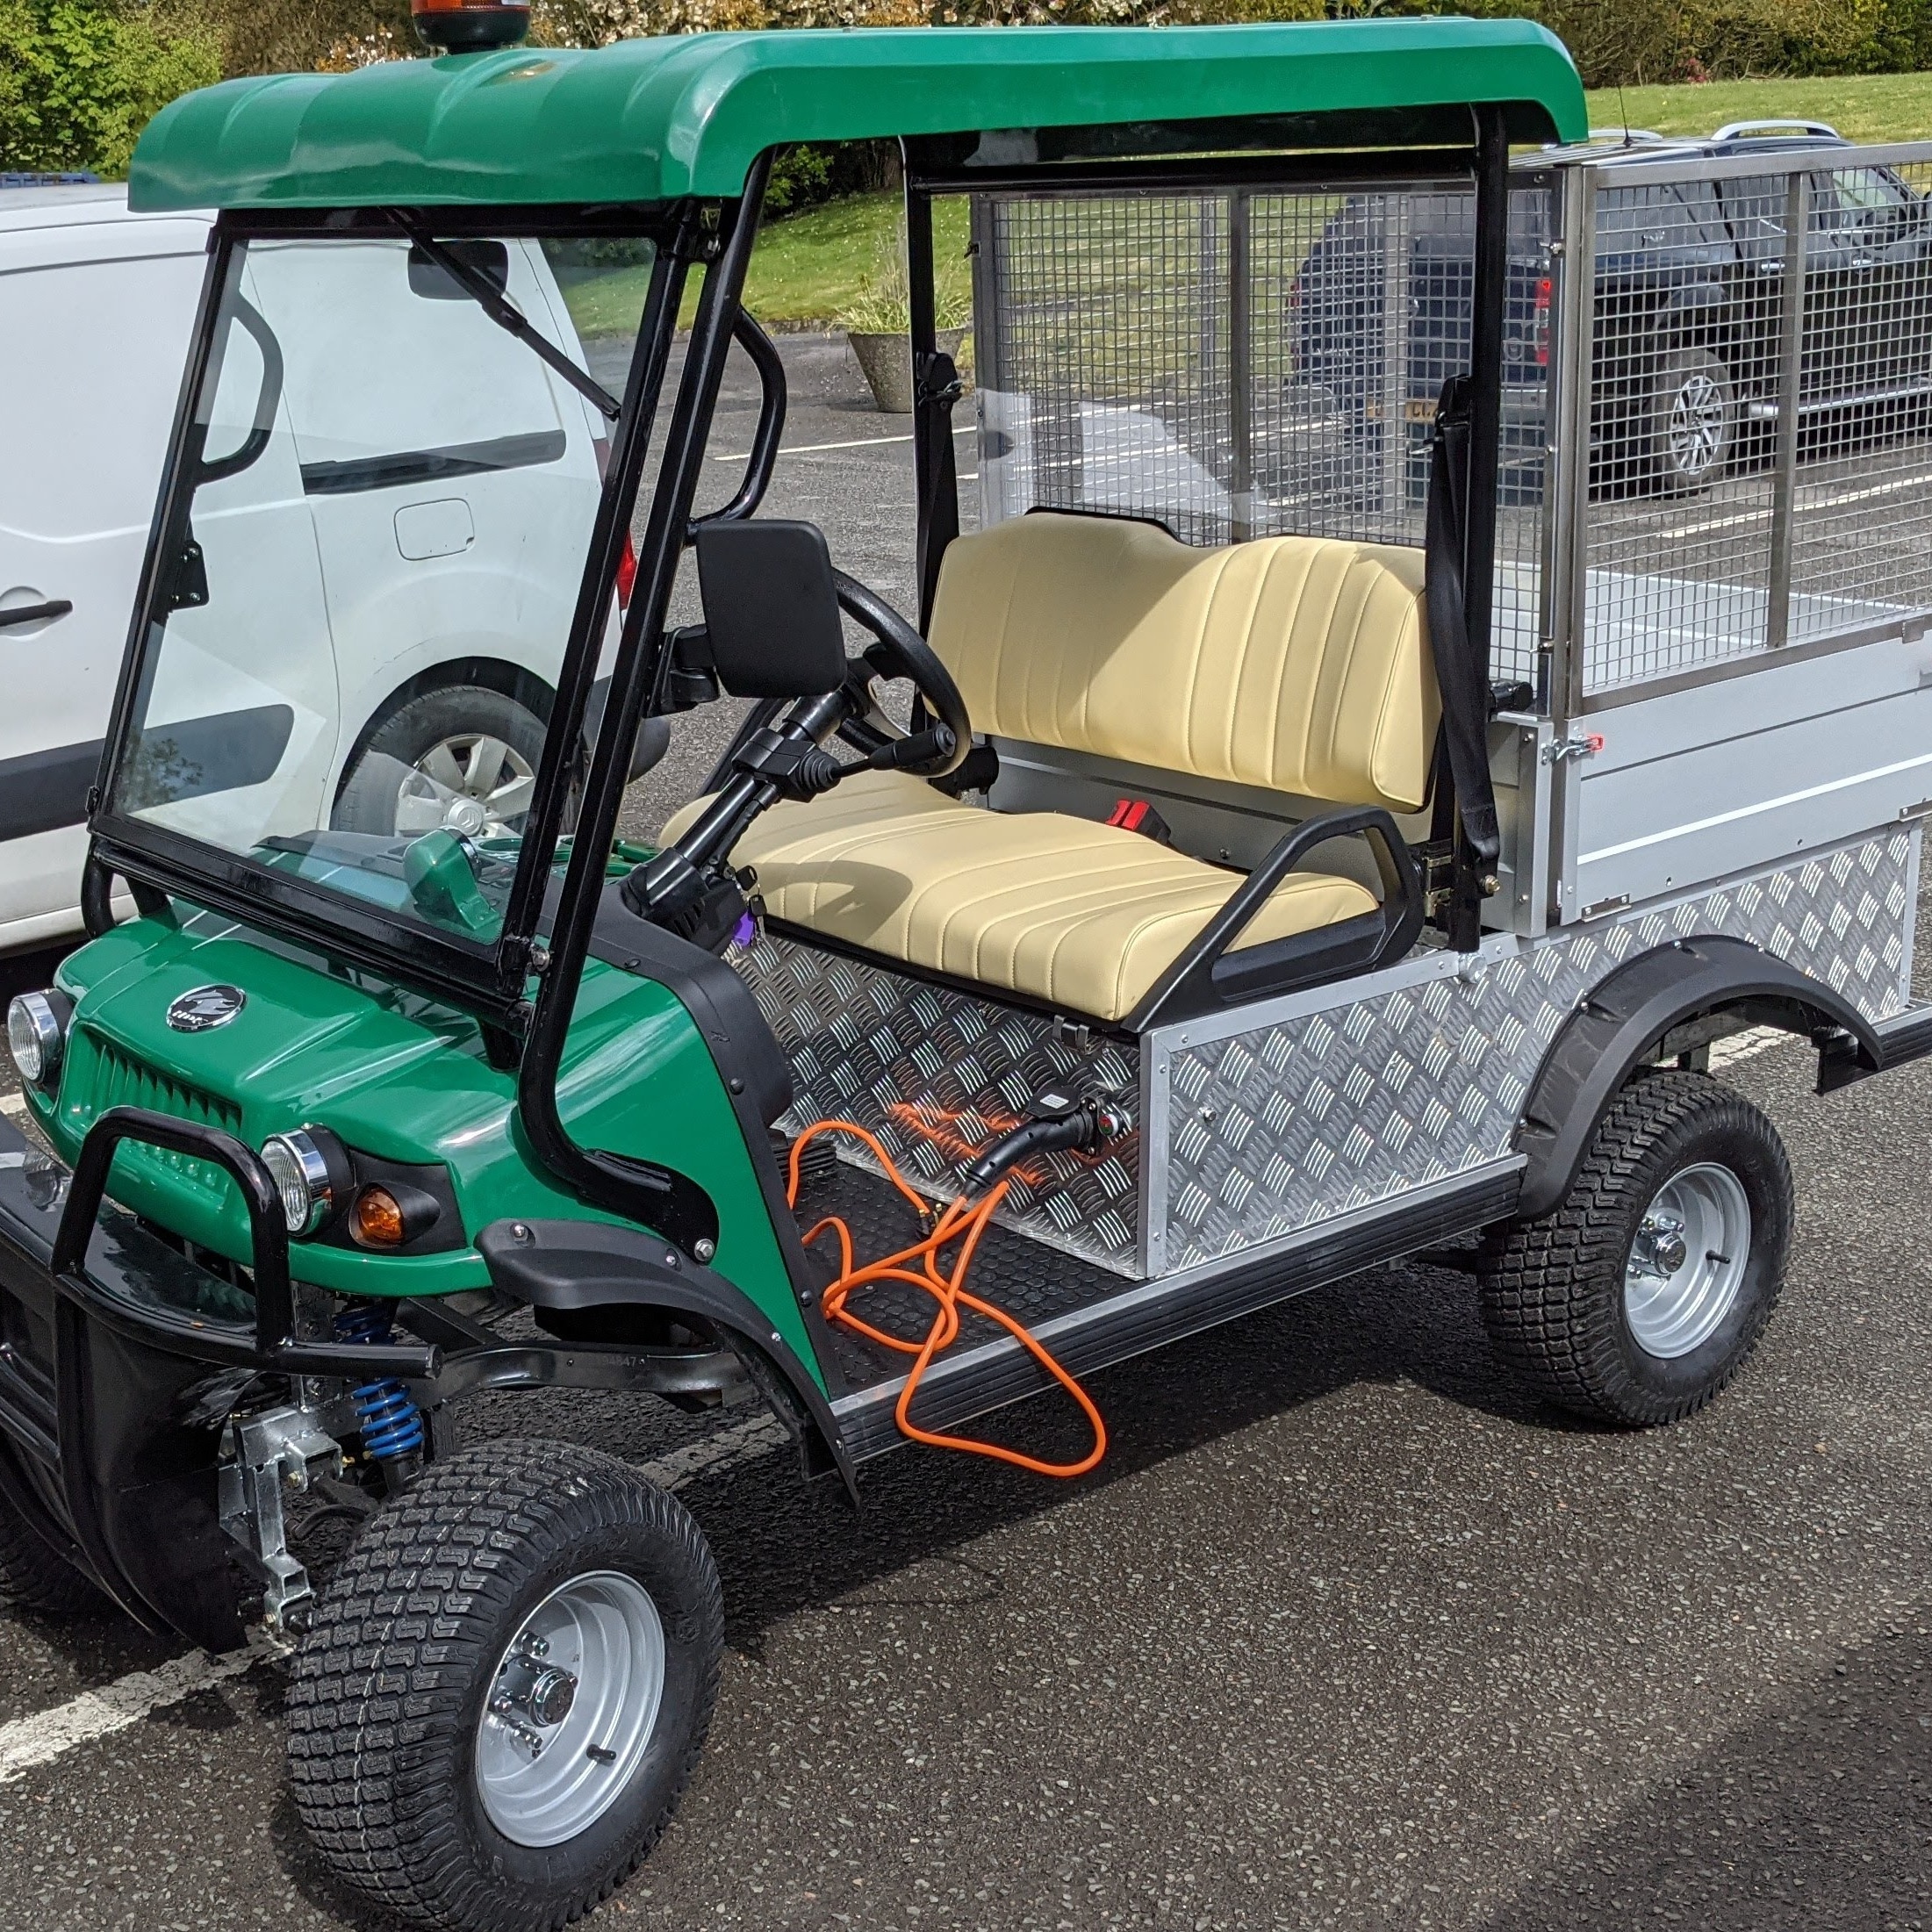 Turfman 700 HDK electric vehicle (Road Legal) Wolfhound Vehicles